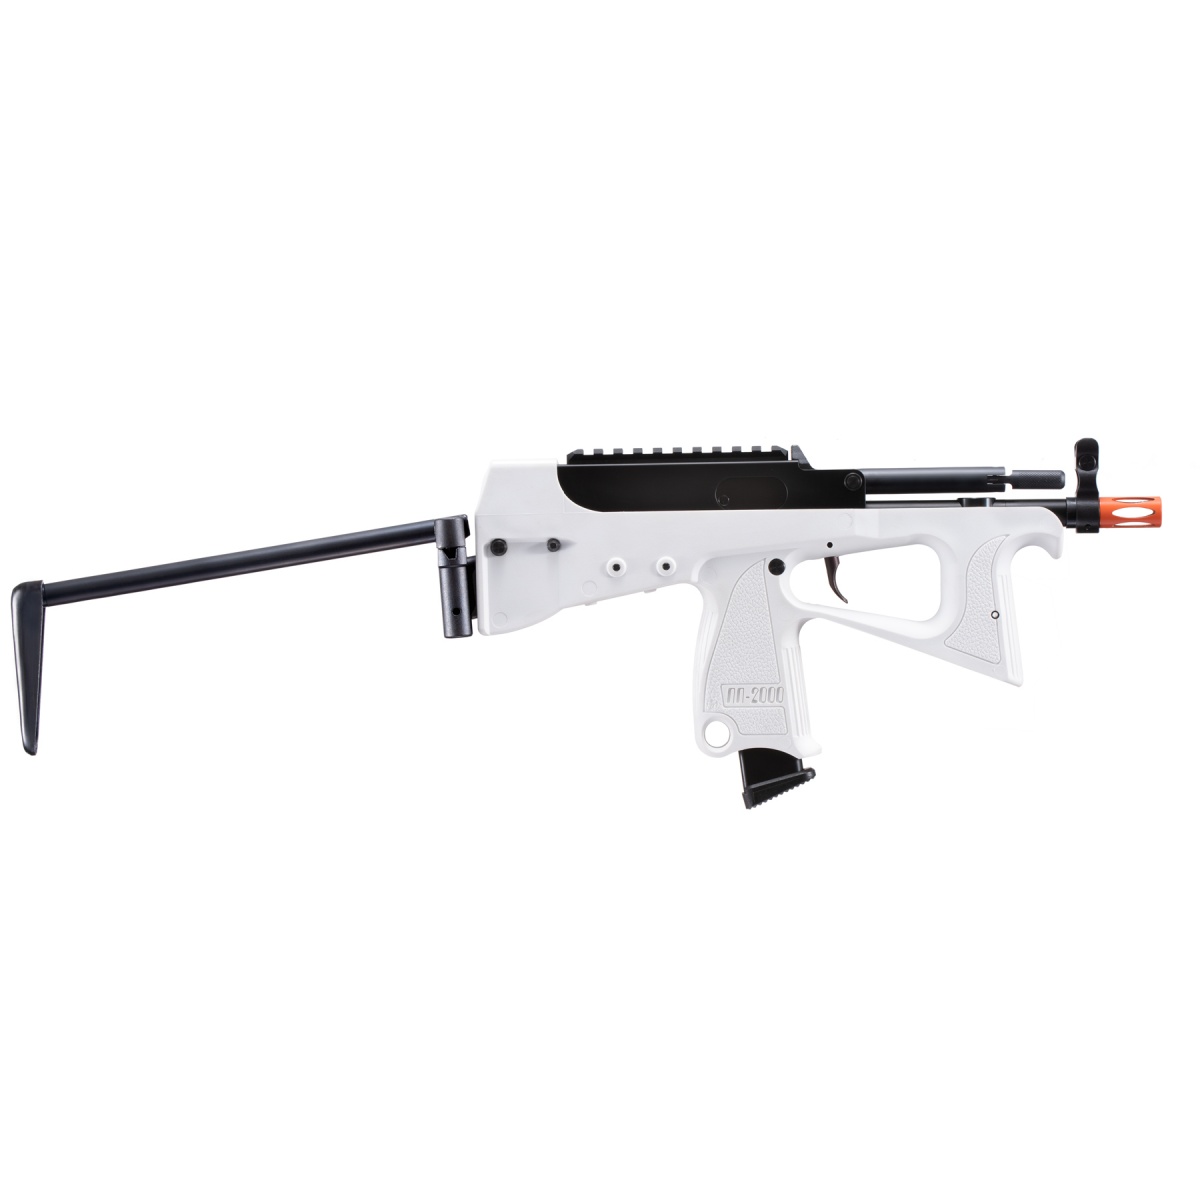 Details about   Modify Tech PP-2k Gas Blowback Airsoft SMG WITH SCOPE  Black,Pink or white!!!!!! 